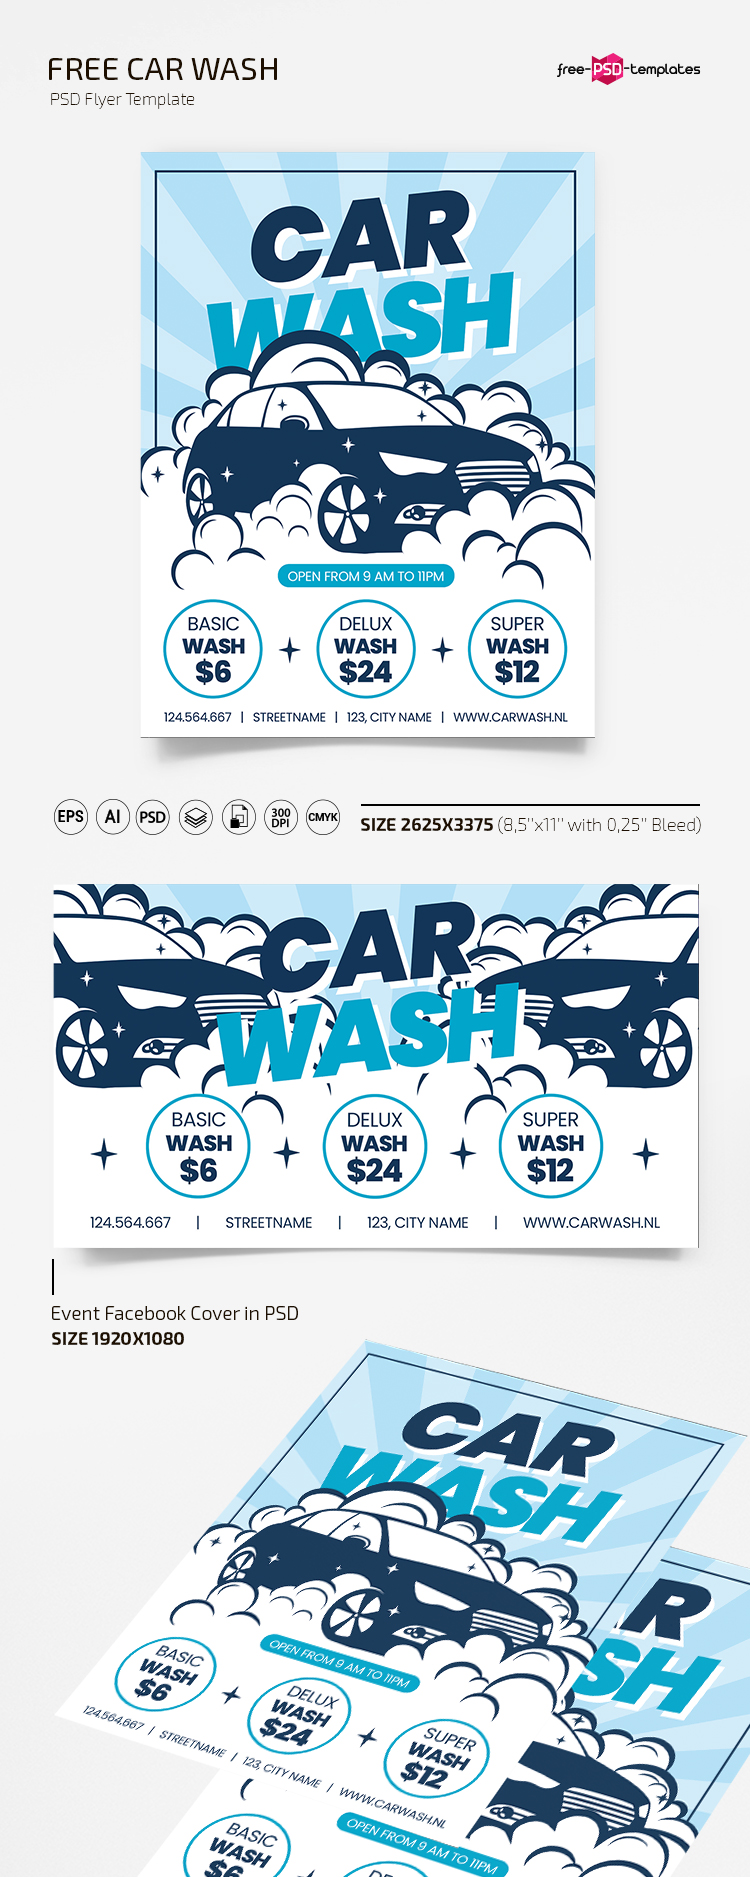 Car Wash Flyer Template from free-psd-templates.com